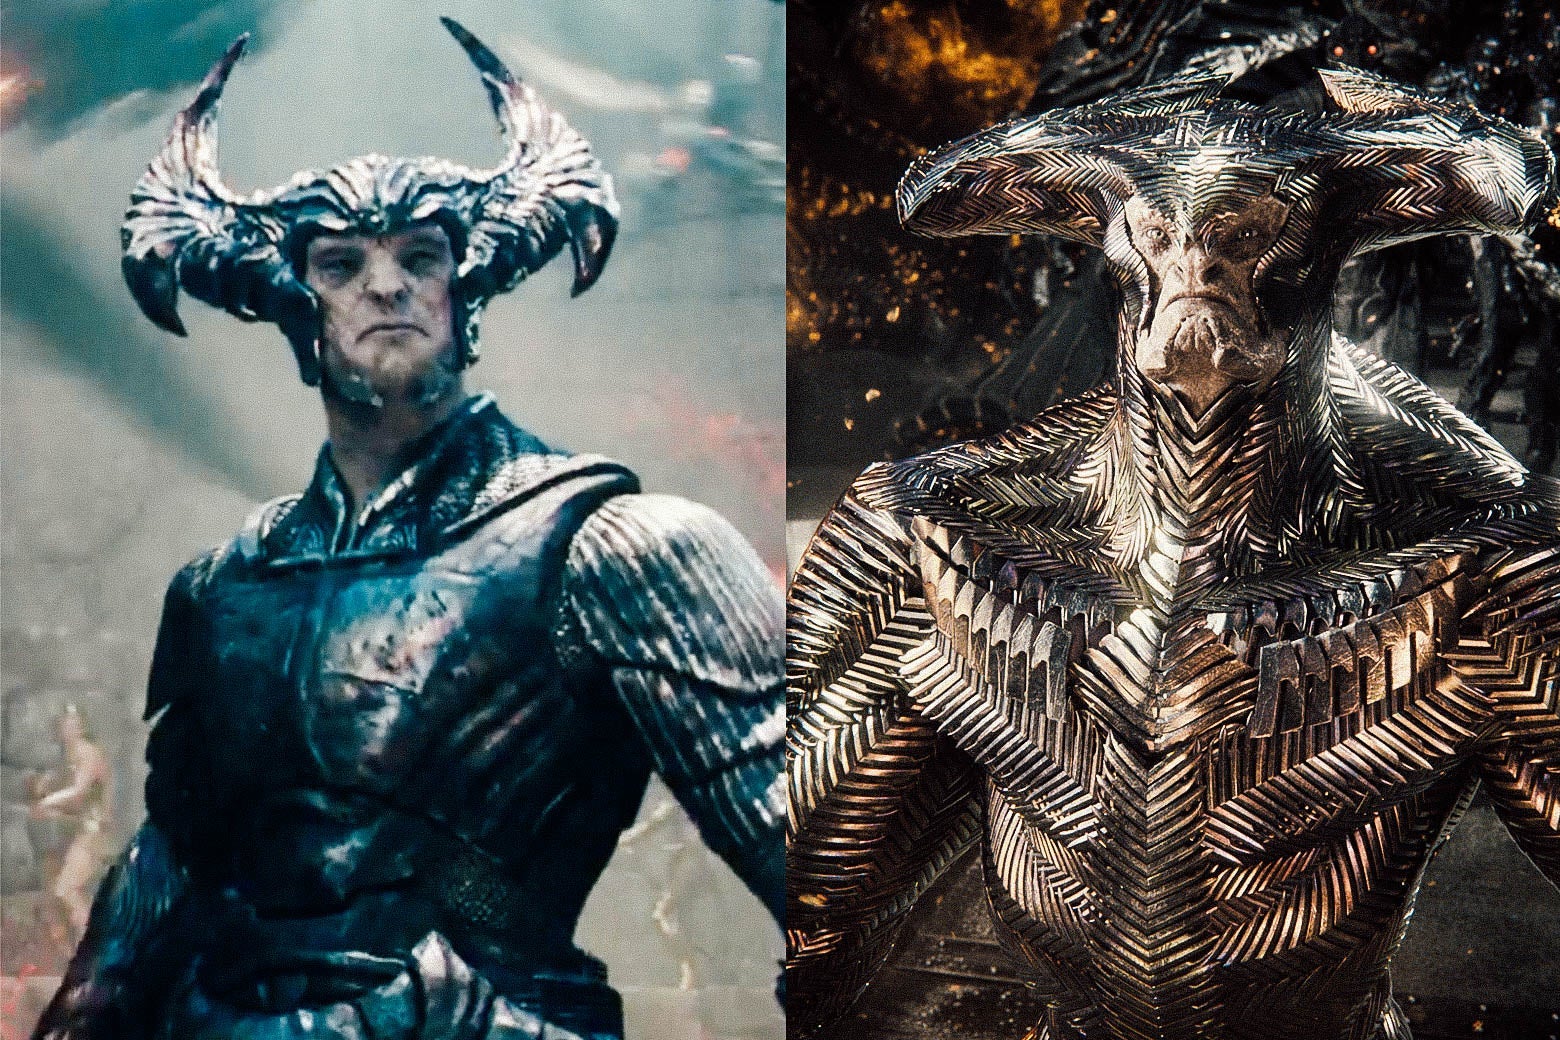 Steppenwolf from Joss Whedon’s version and from Zack Snyder’s version.